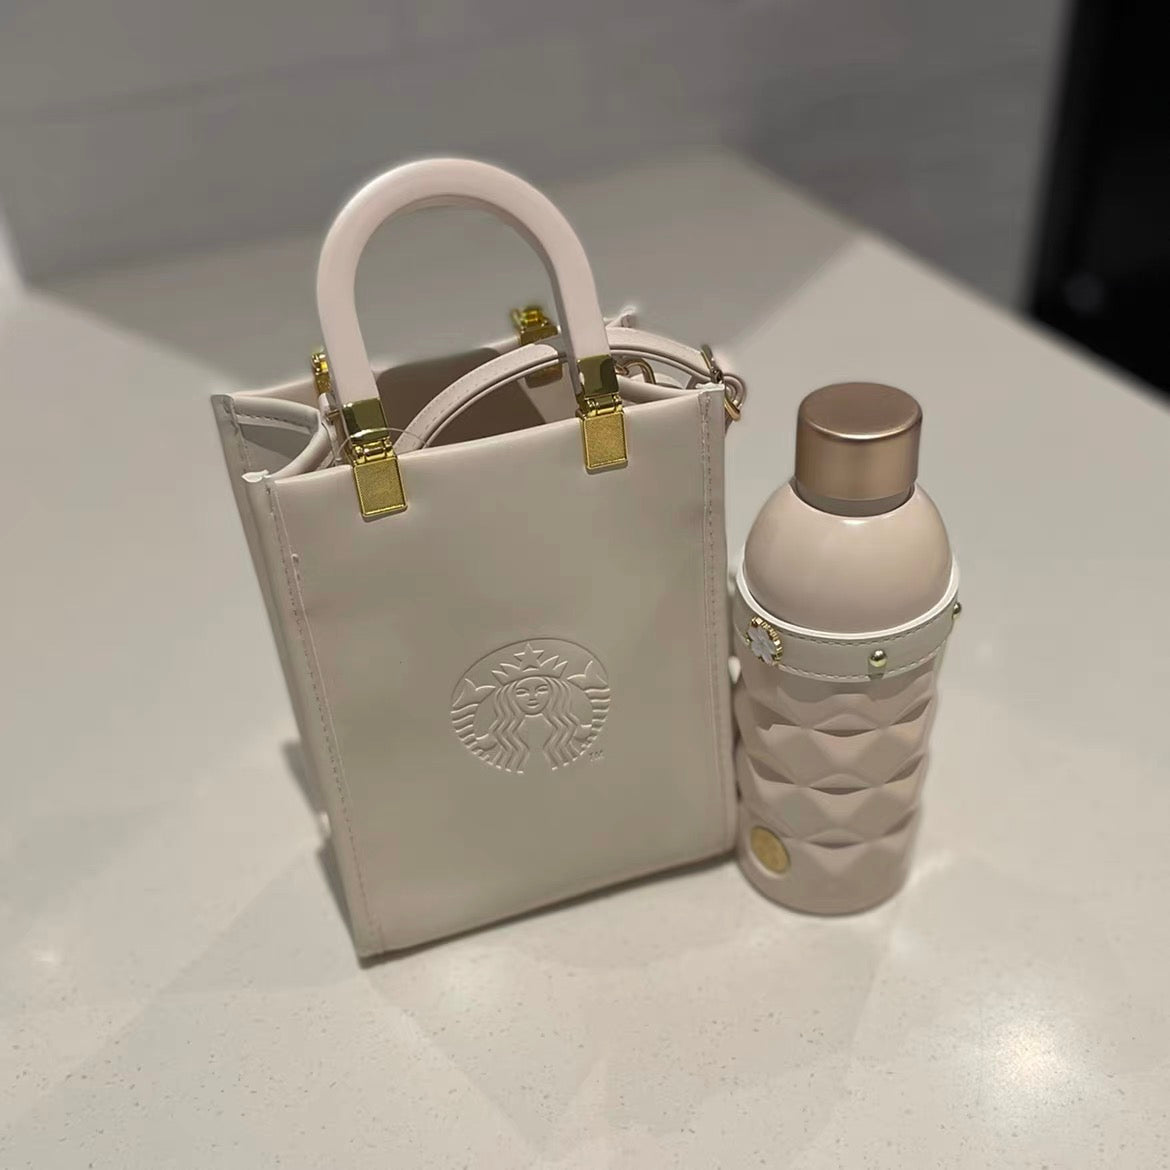 14oz China White Stainless Steel Bottle with Bag